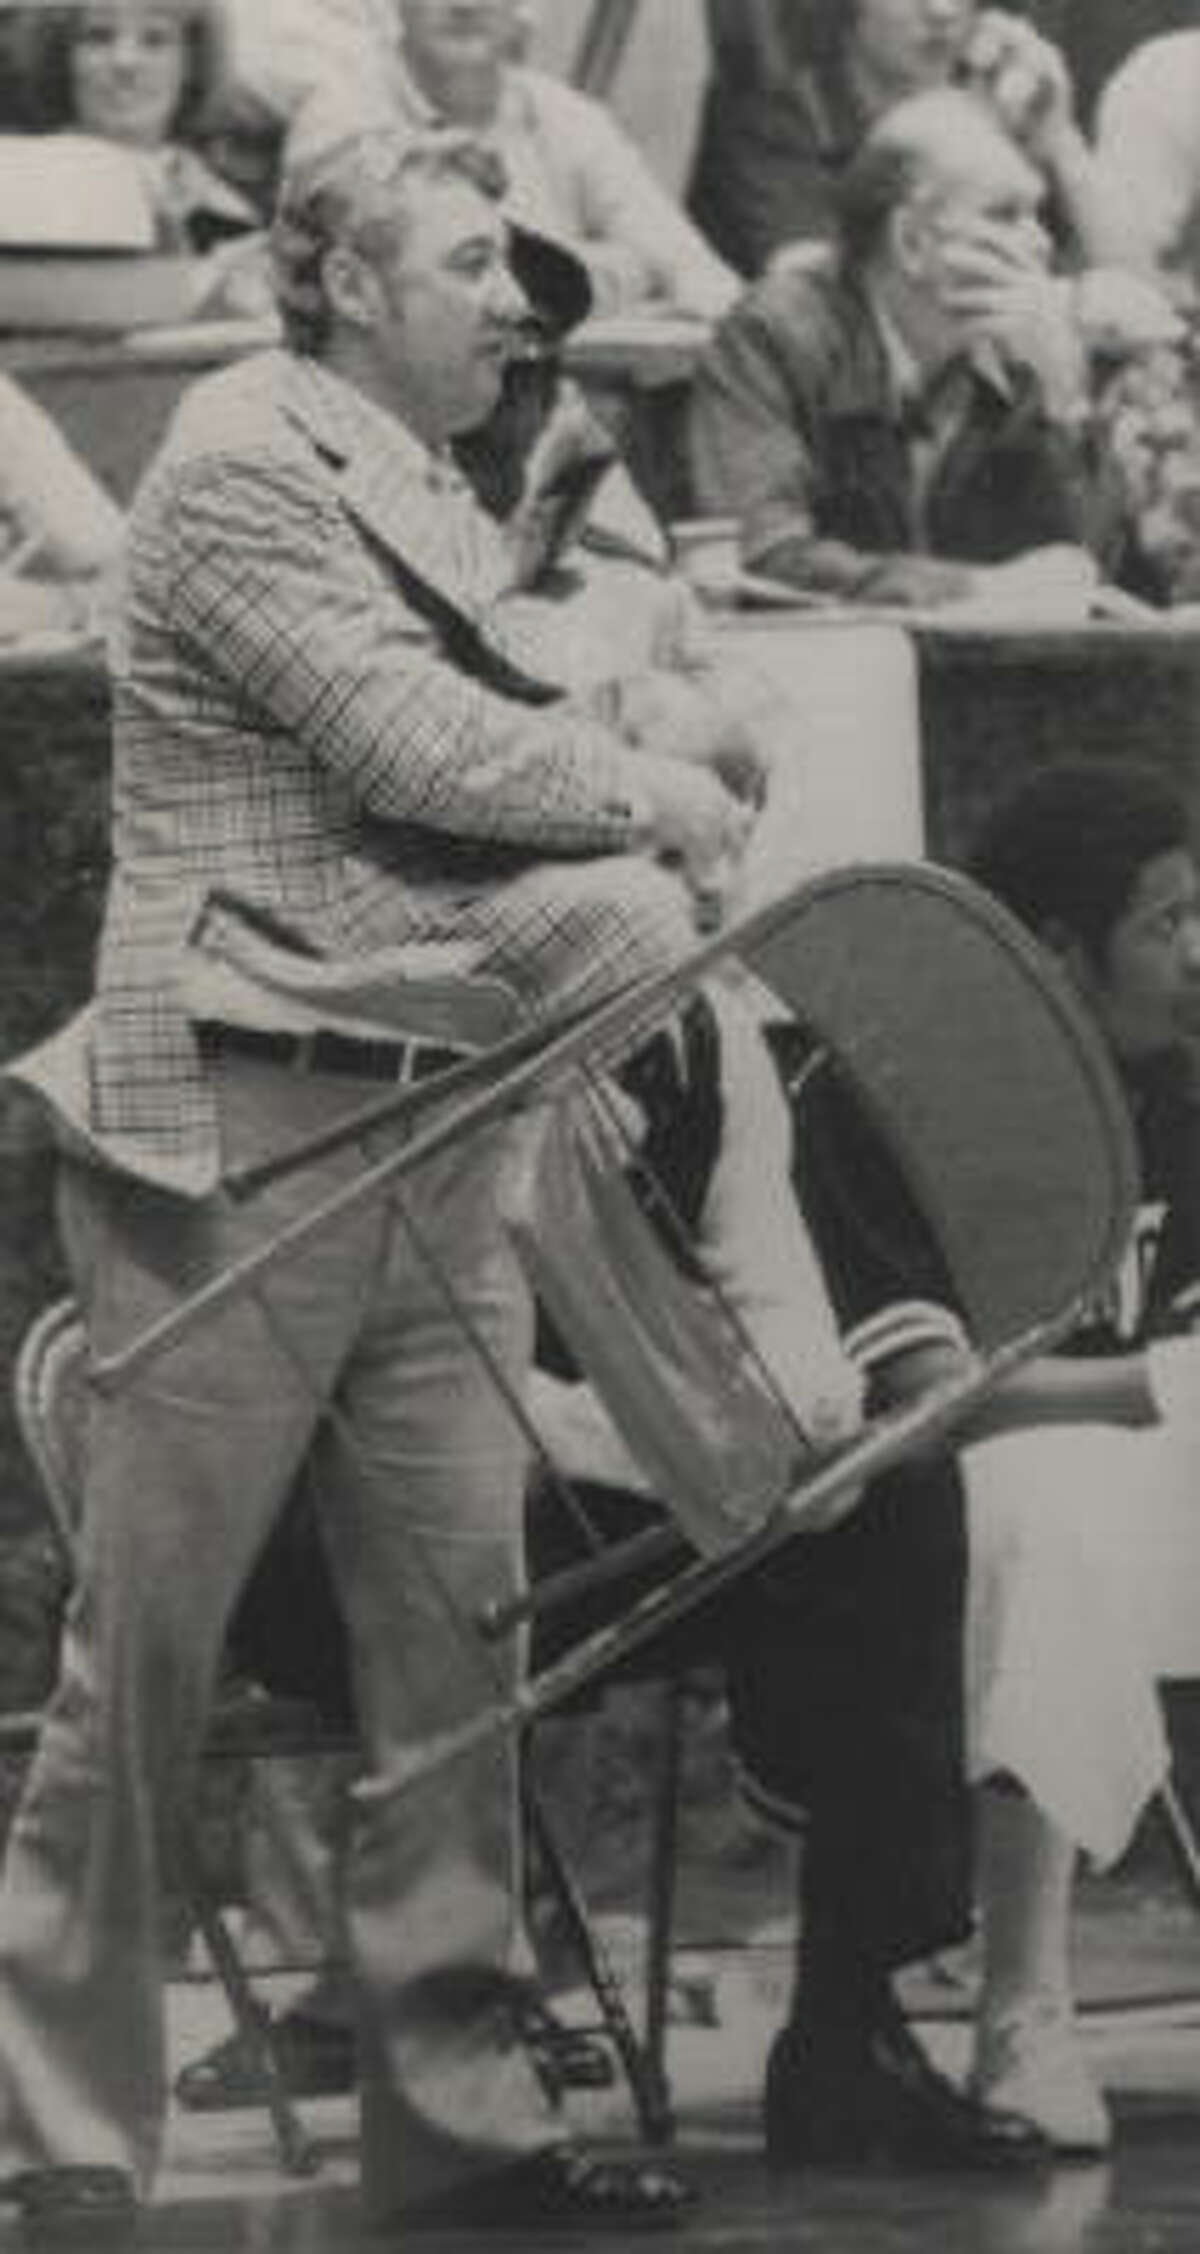 A&M coach Shelby Metcalf displays the fiery side of his colorful personality during a loss to SMU in 1976.